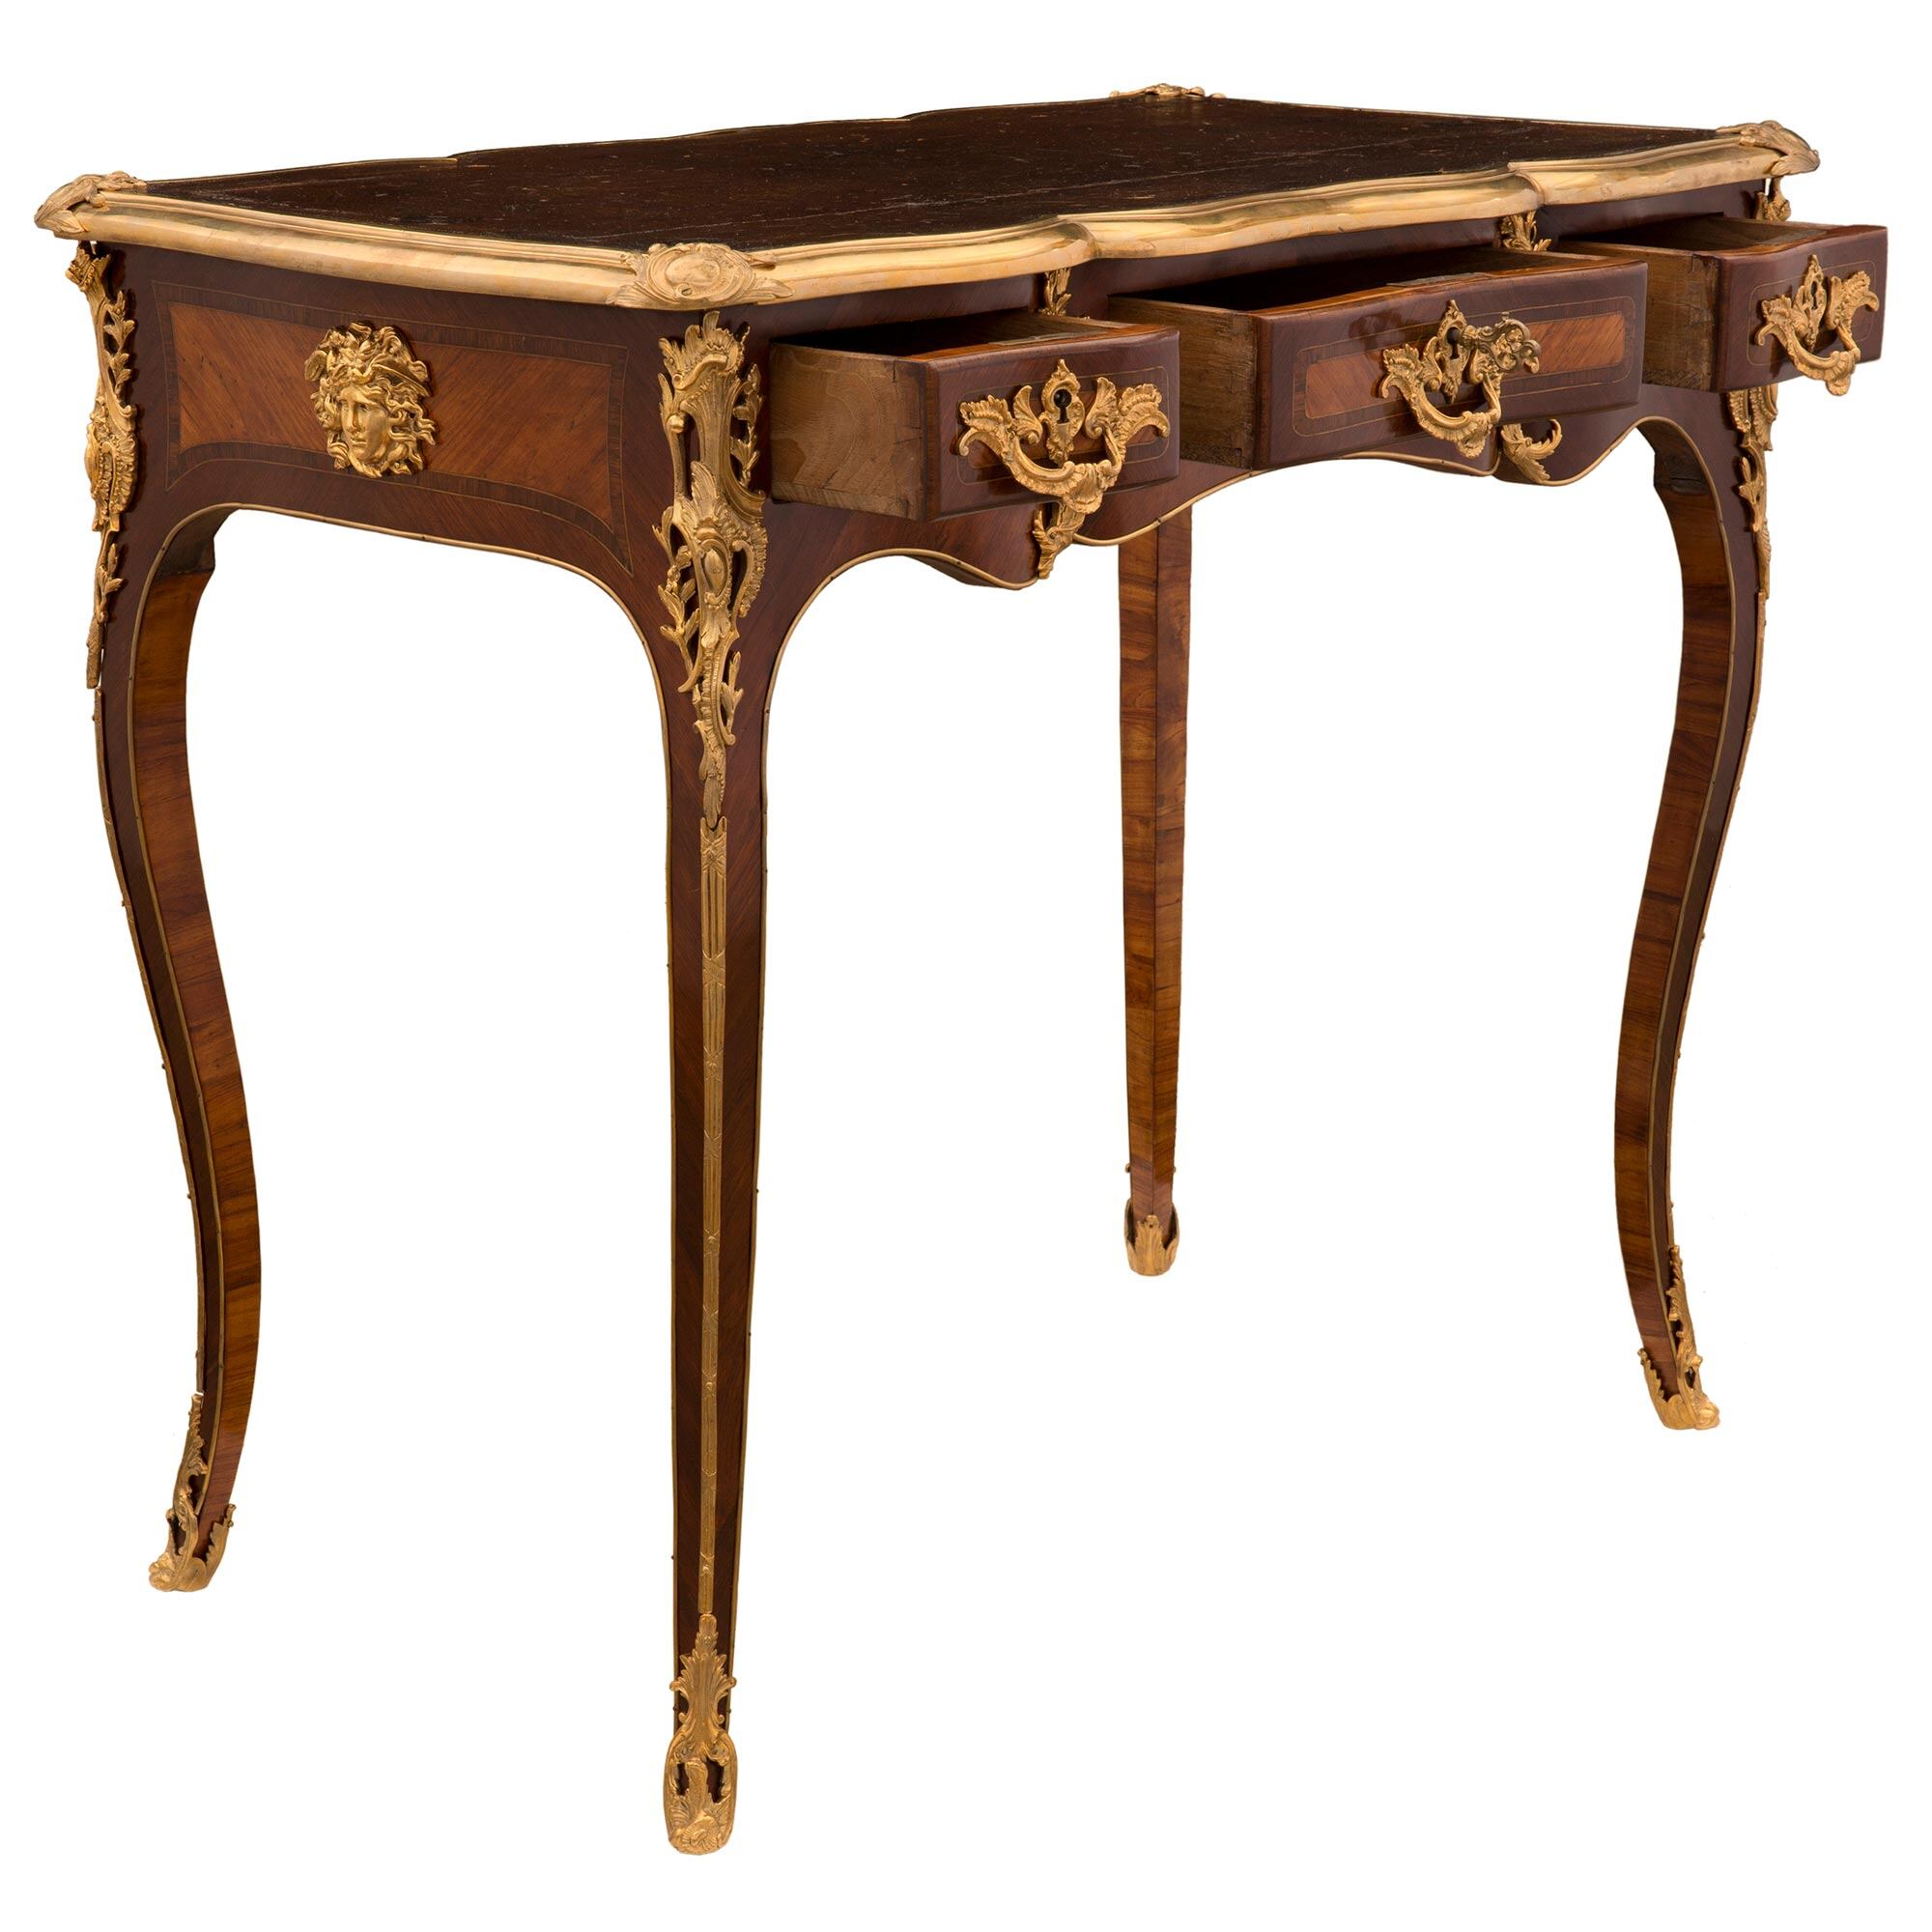 Reproduction of the king's Louis XV desk at Versailles - louis XV furniture